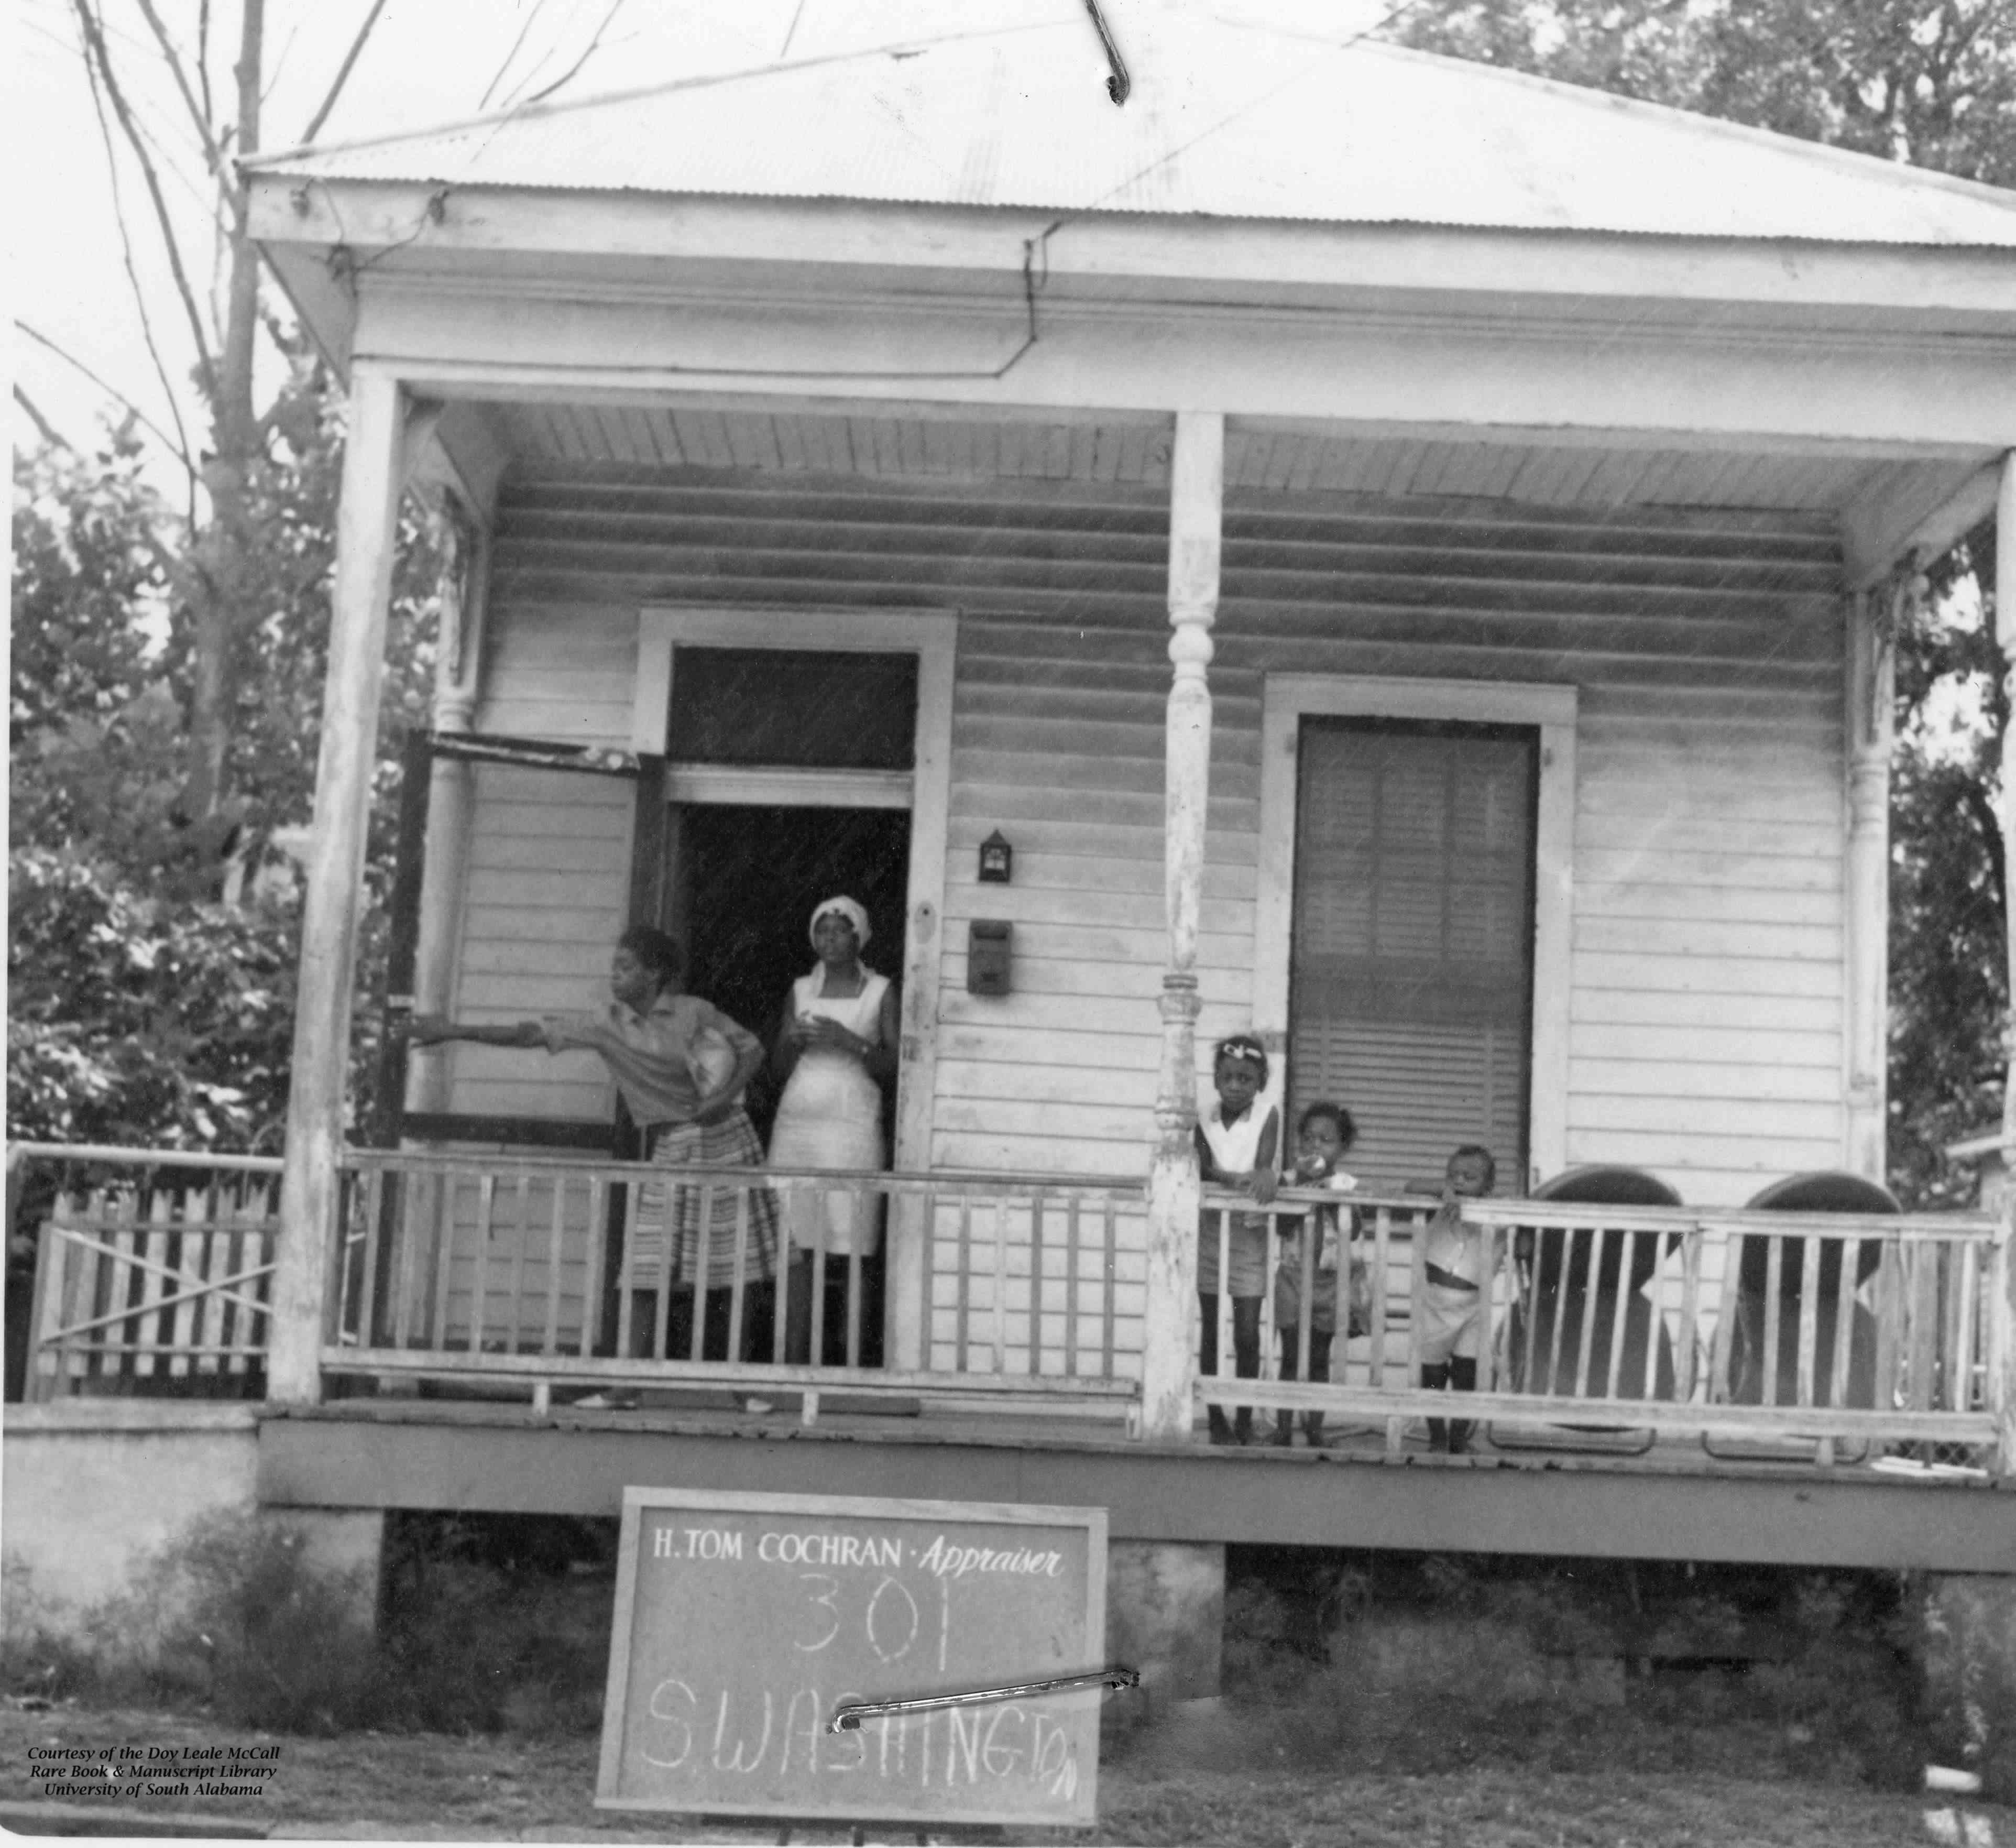 Women and children stand on a porch in a black and white photo